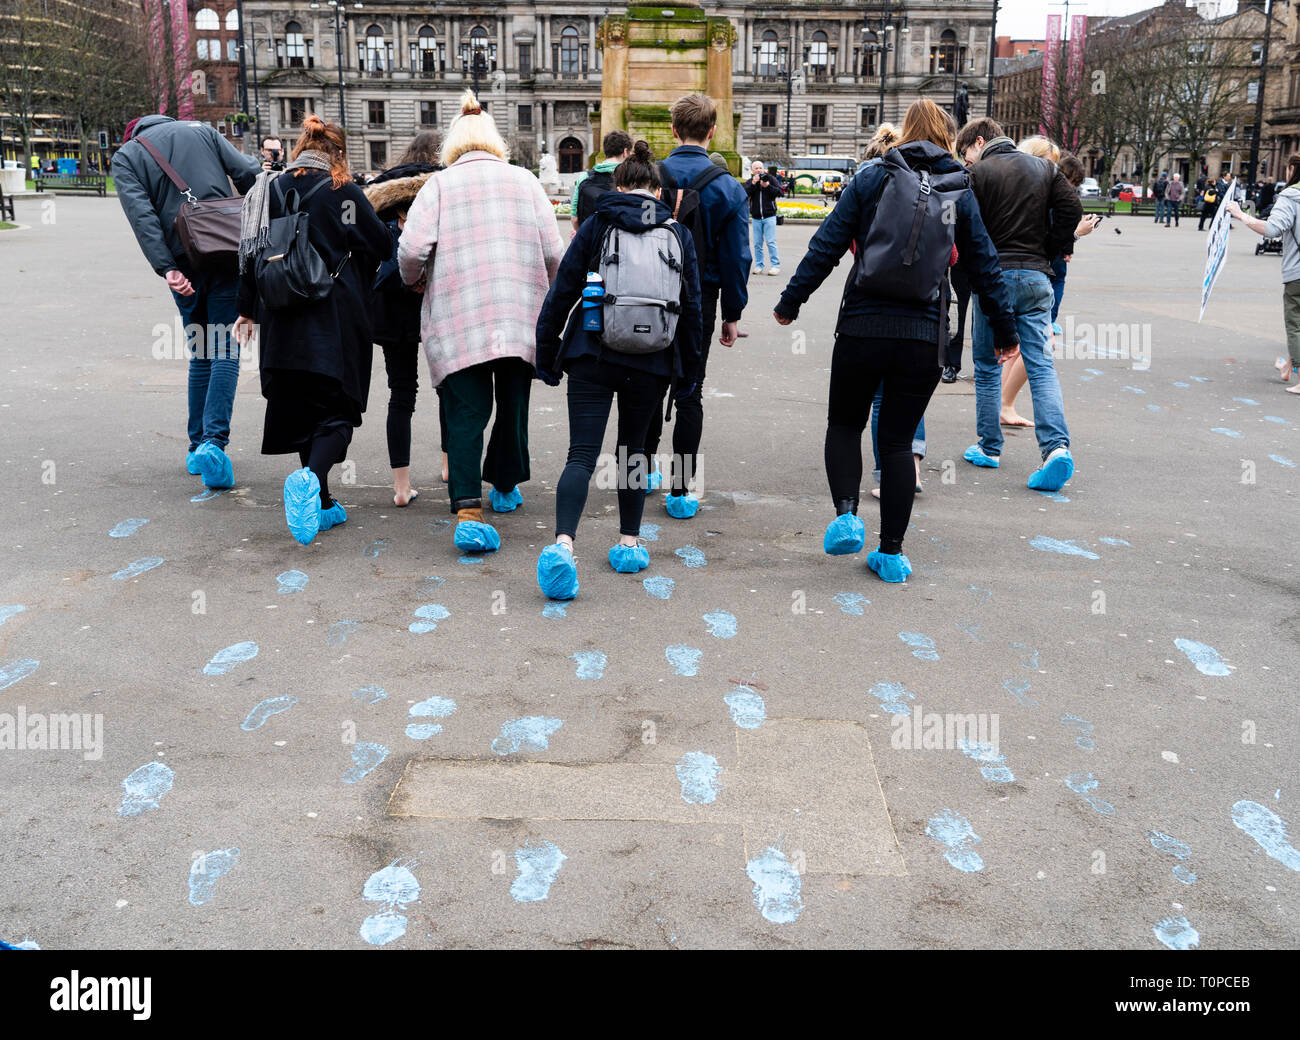 Glasgow, Scotland, UK. 21 March, 2019. A  'Blue Wave' demonstration by the Extinction Rebellion climate change protest group saw protesters make blue footprints, made from water-soluble paint, across George Square to the City Chambers. The peaceful protest briefly held up traffic. The Group aims to highlight threat of rising water levels in the River Clyde and of global climate change. Credit: Iain Masterton/Alamy Live News Stock Photo